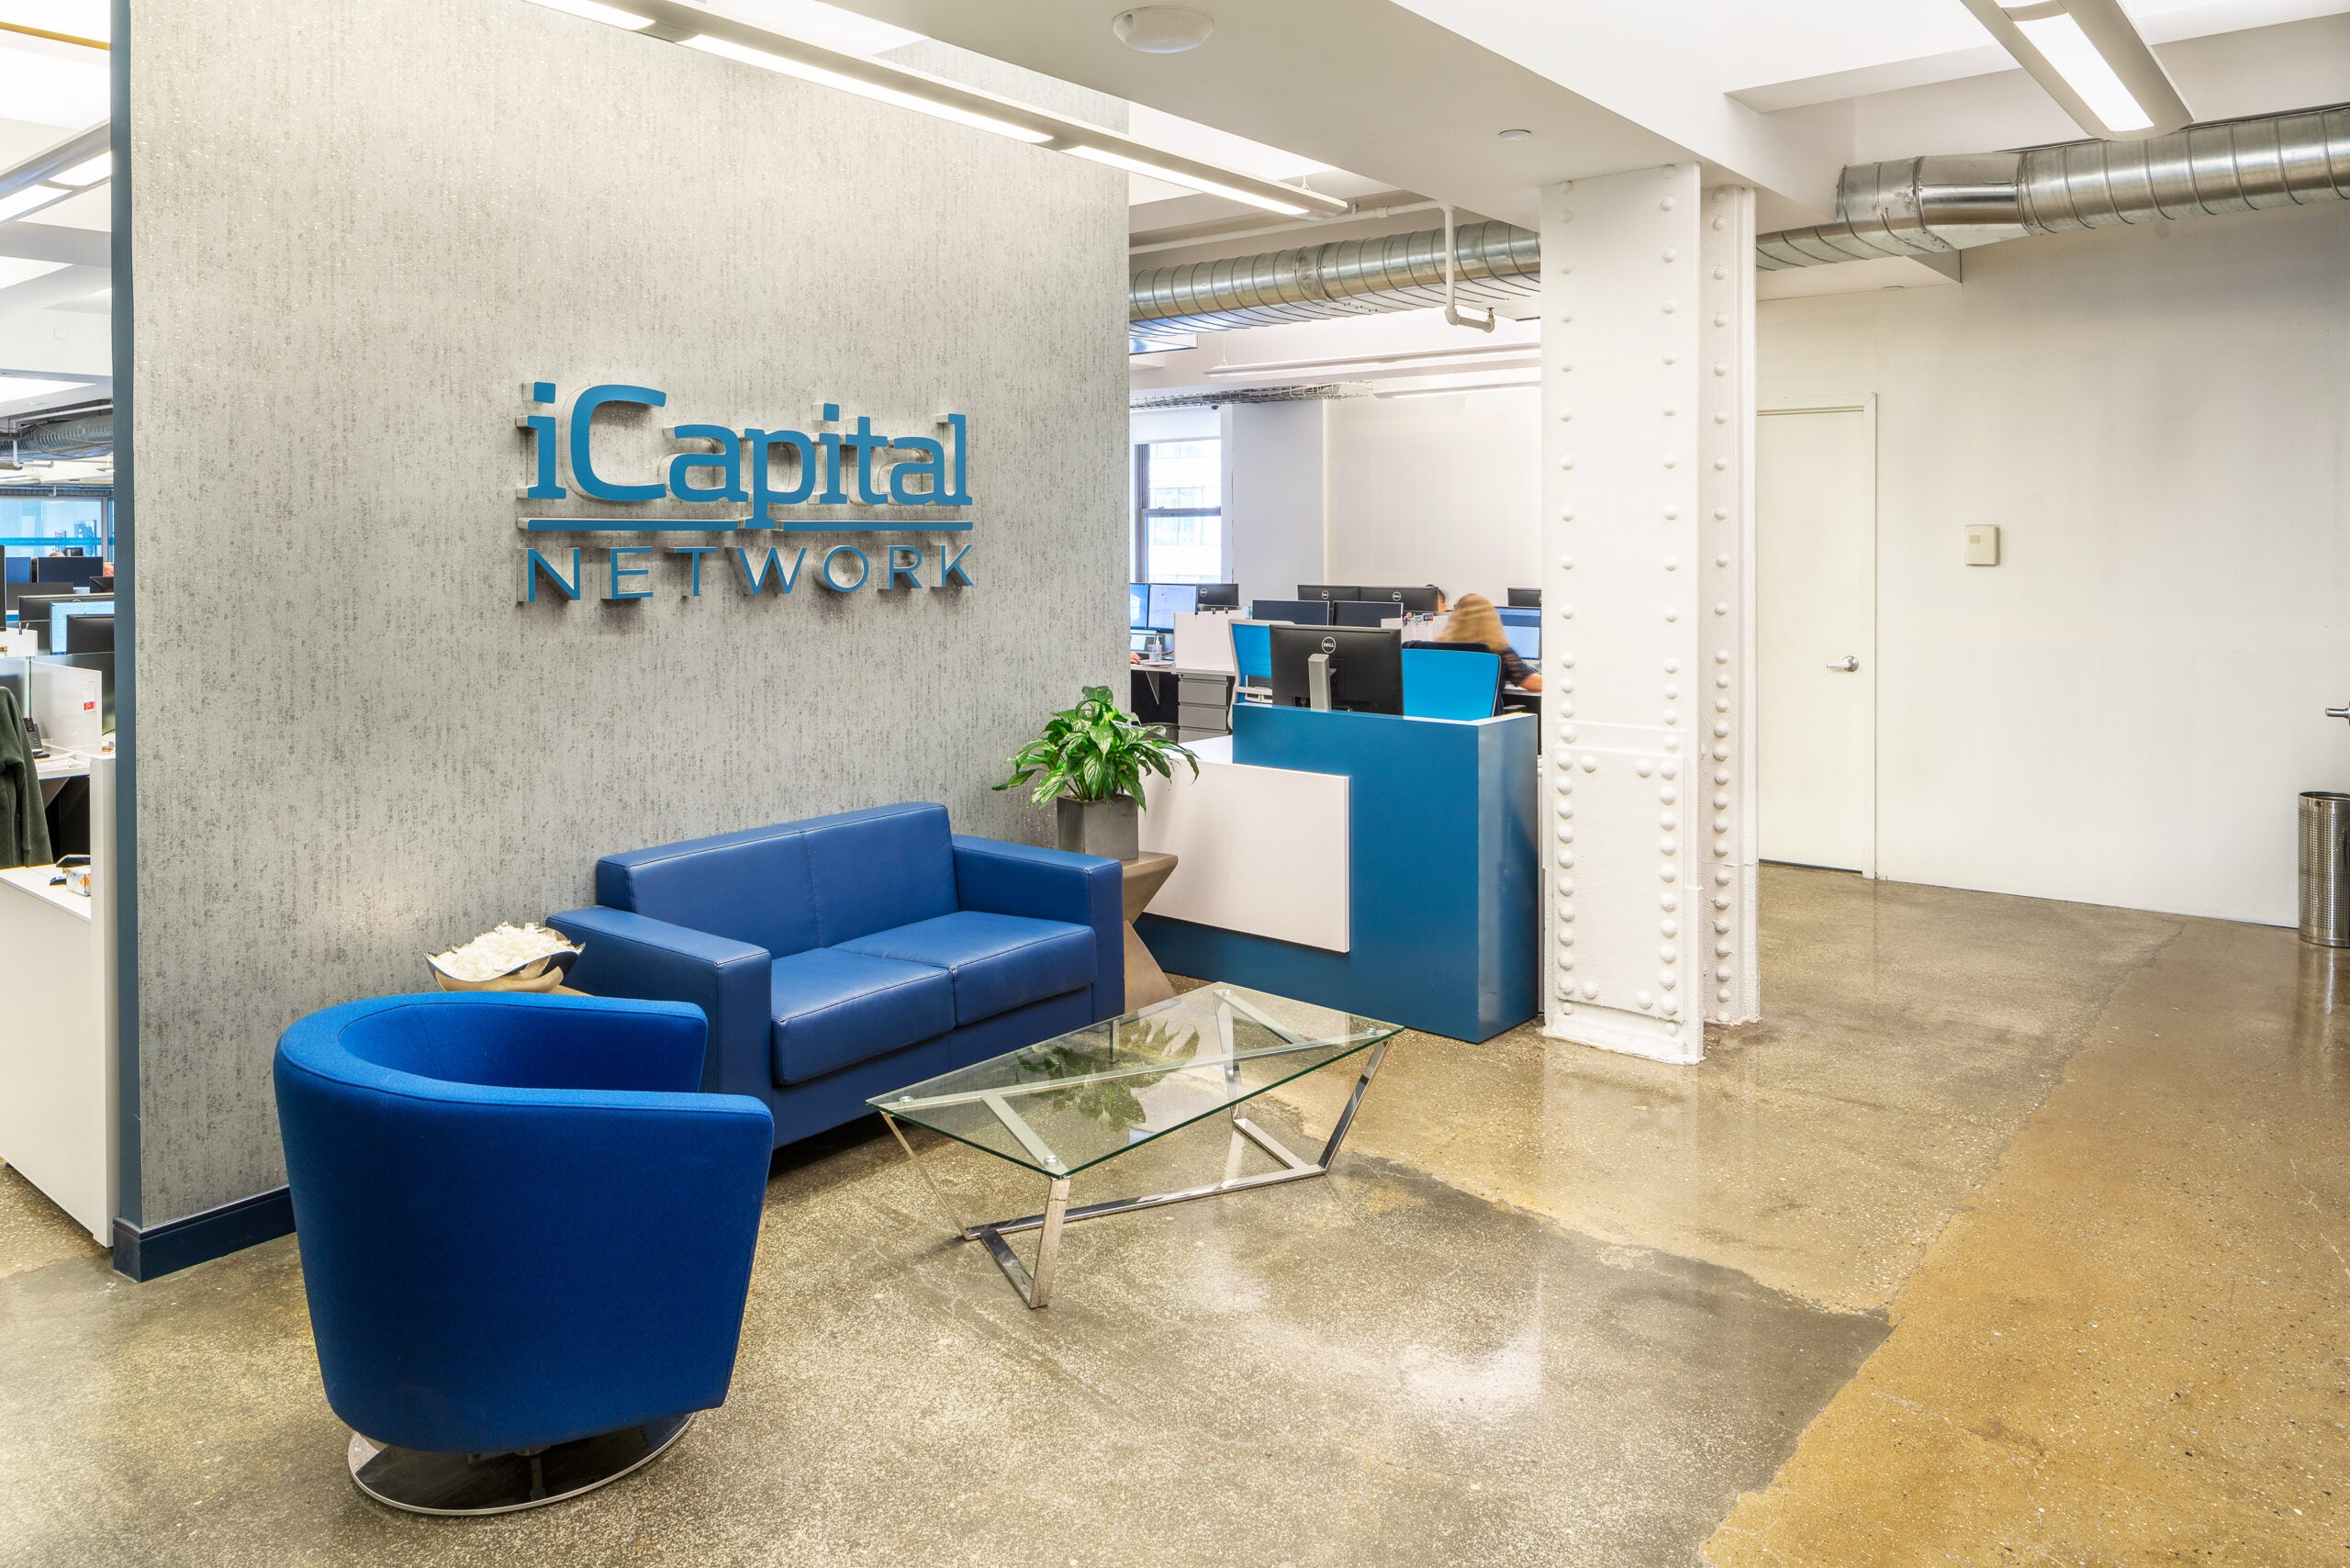 iCAPITAL NETWORK, INC. MORE THAN DOUBLES ITS CURRENT OFFICE SPACE WITH EMPIRE STATE REALTY TRUST AT ONE GRAND CENTRAL PLACE